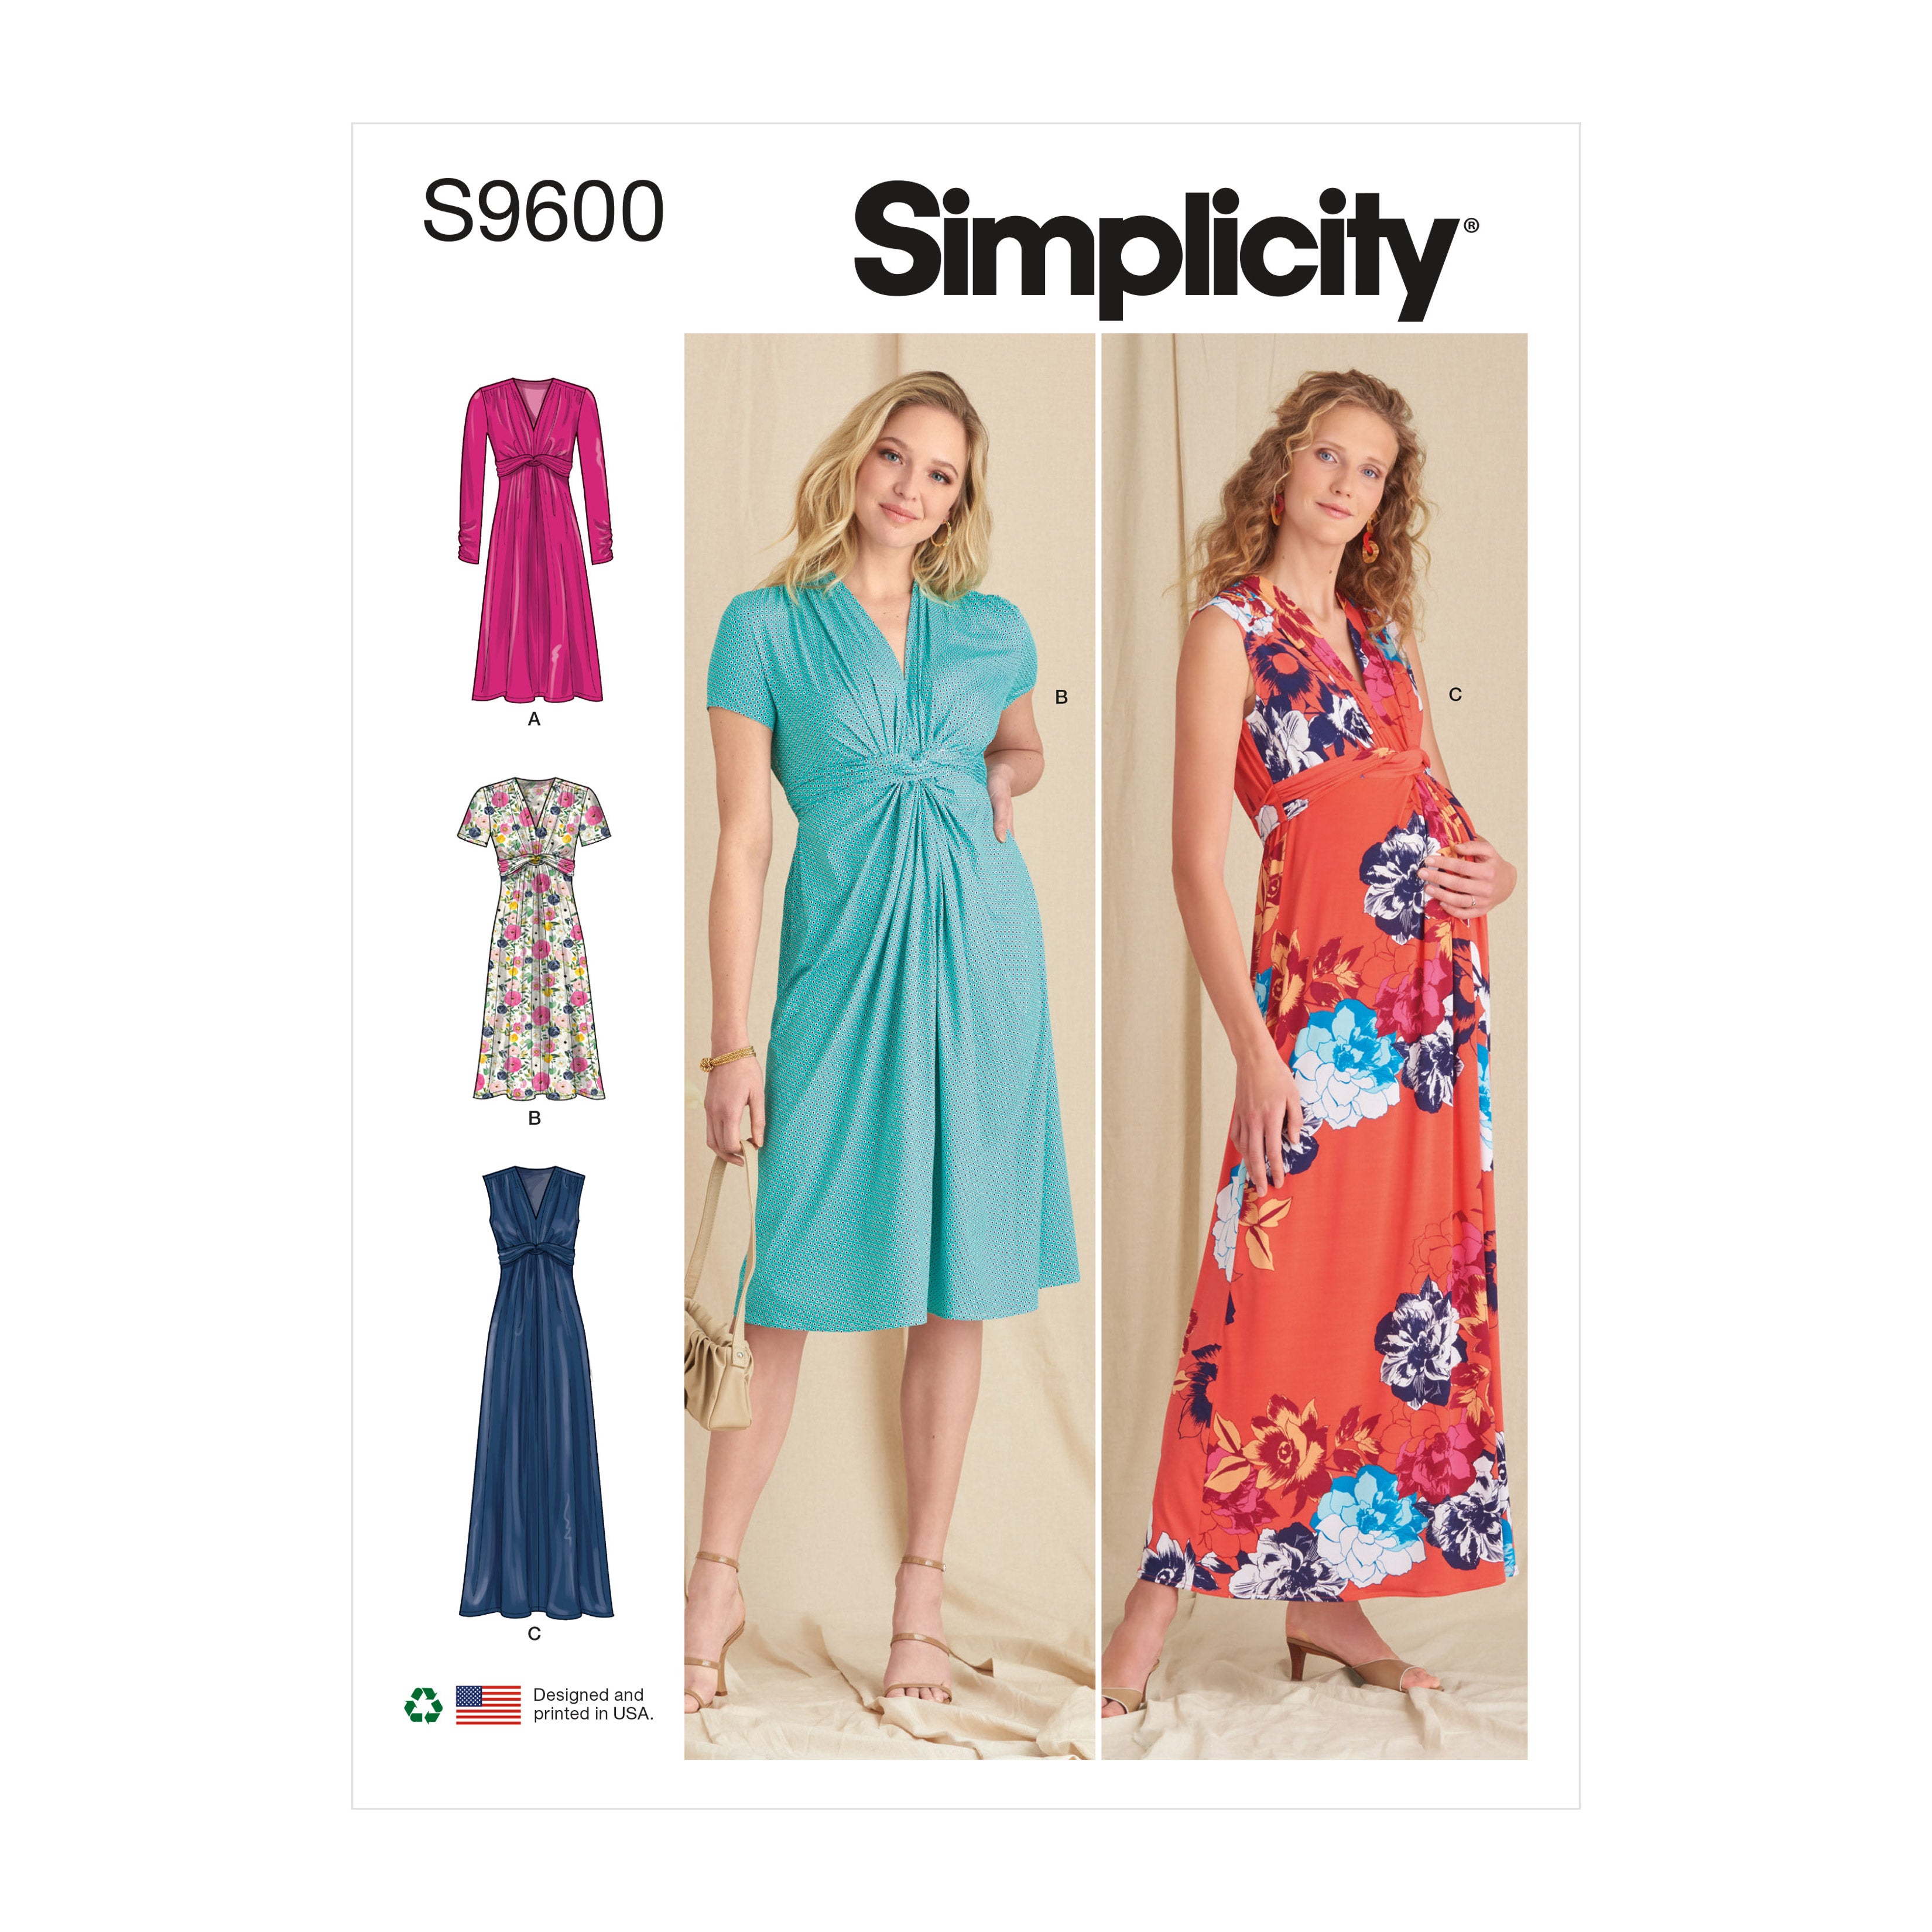 Simplicity Sewing Pattern S9599 - Women's Knit Dresses by Mimi G